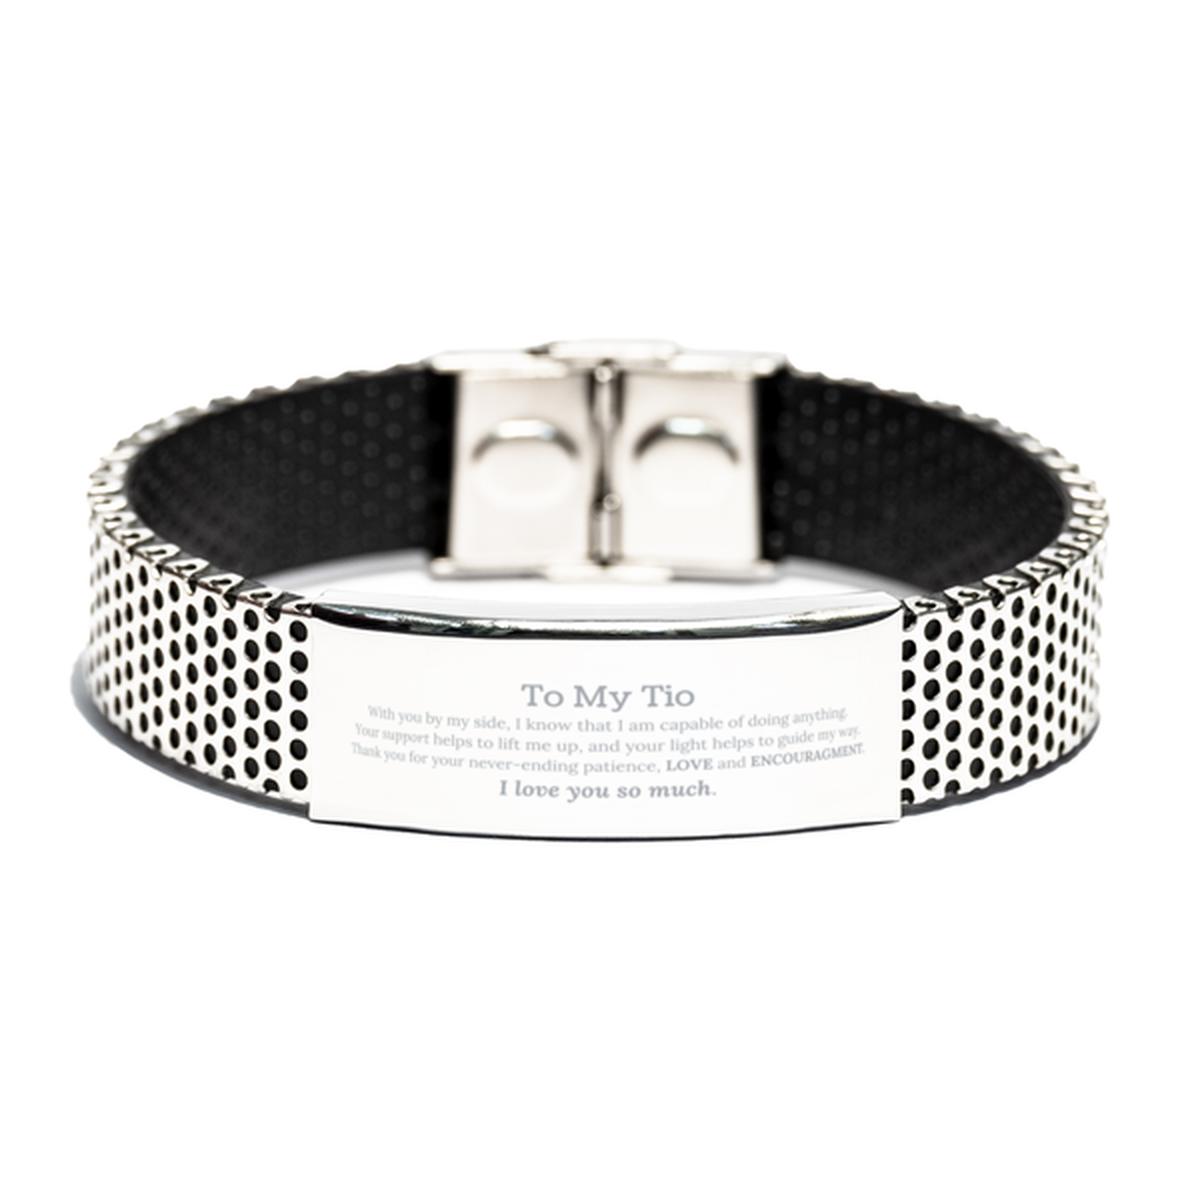 Appreciation Tio Stainless Steel Bracelet Gifts, To My Tio Birthday Christmas Wedding Keepsake Gifts for Tio With you by my side, I know that I am capable of doing anything. I love you so much